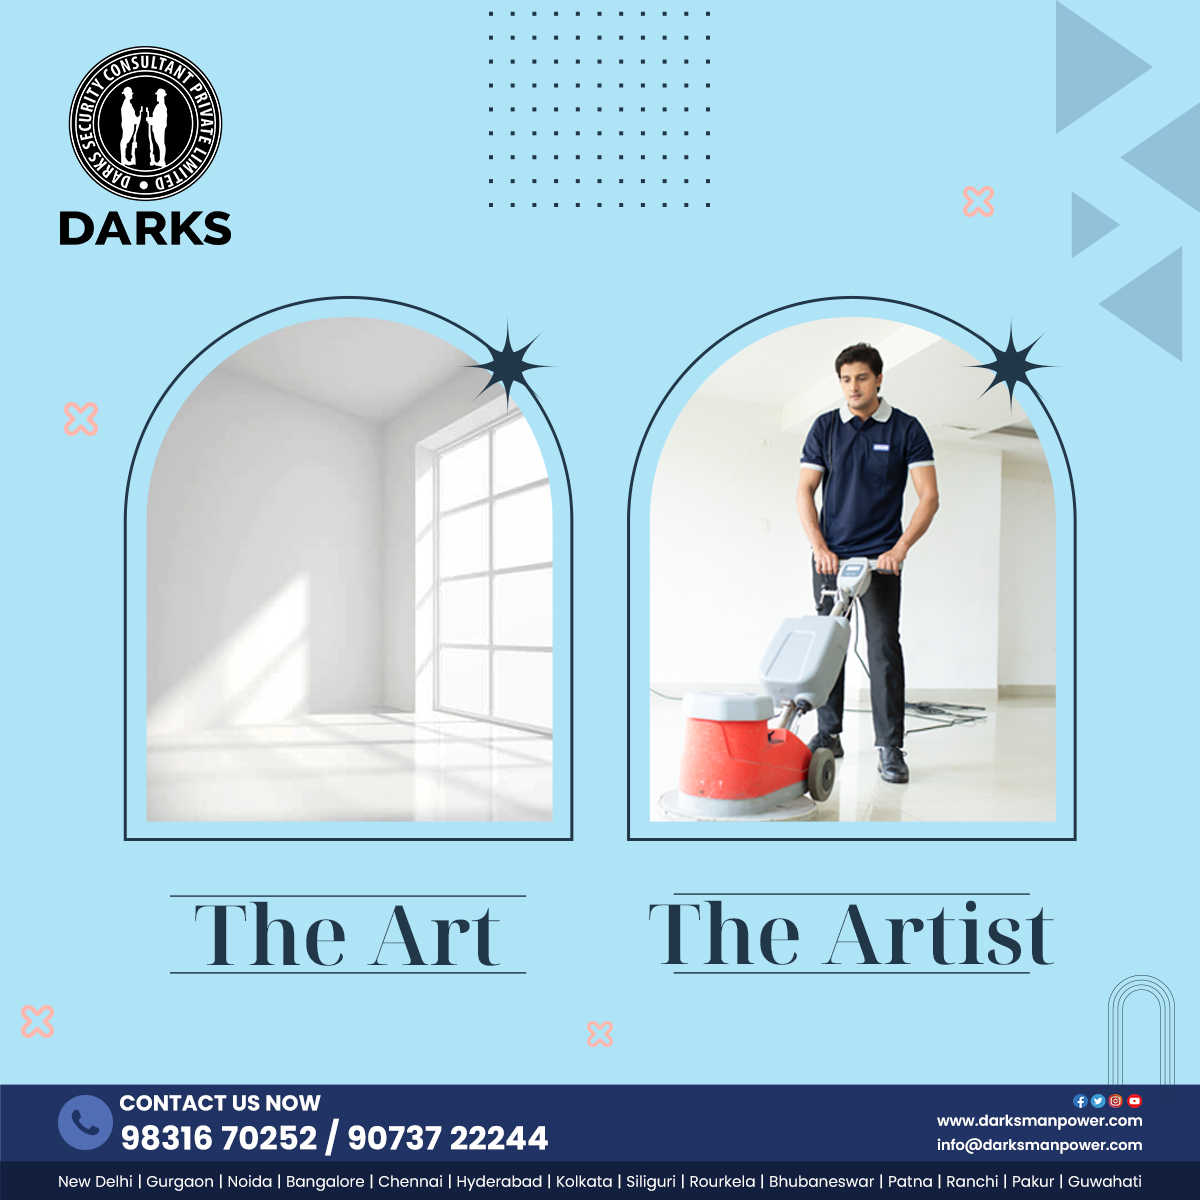 We have mastered the art of keep your space just neat and clean !!! Call us now !!

#germsfree #cleaningservice #cleaningtips #cleaning #cleaningcompany #cleaning #CleaningPower #theartandtheartist #cleanhome #cleaningmotivation #neatANDclean #darksmanpower